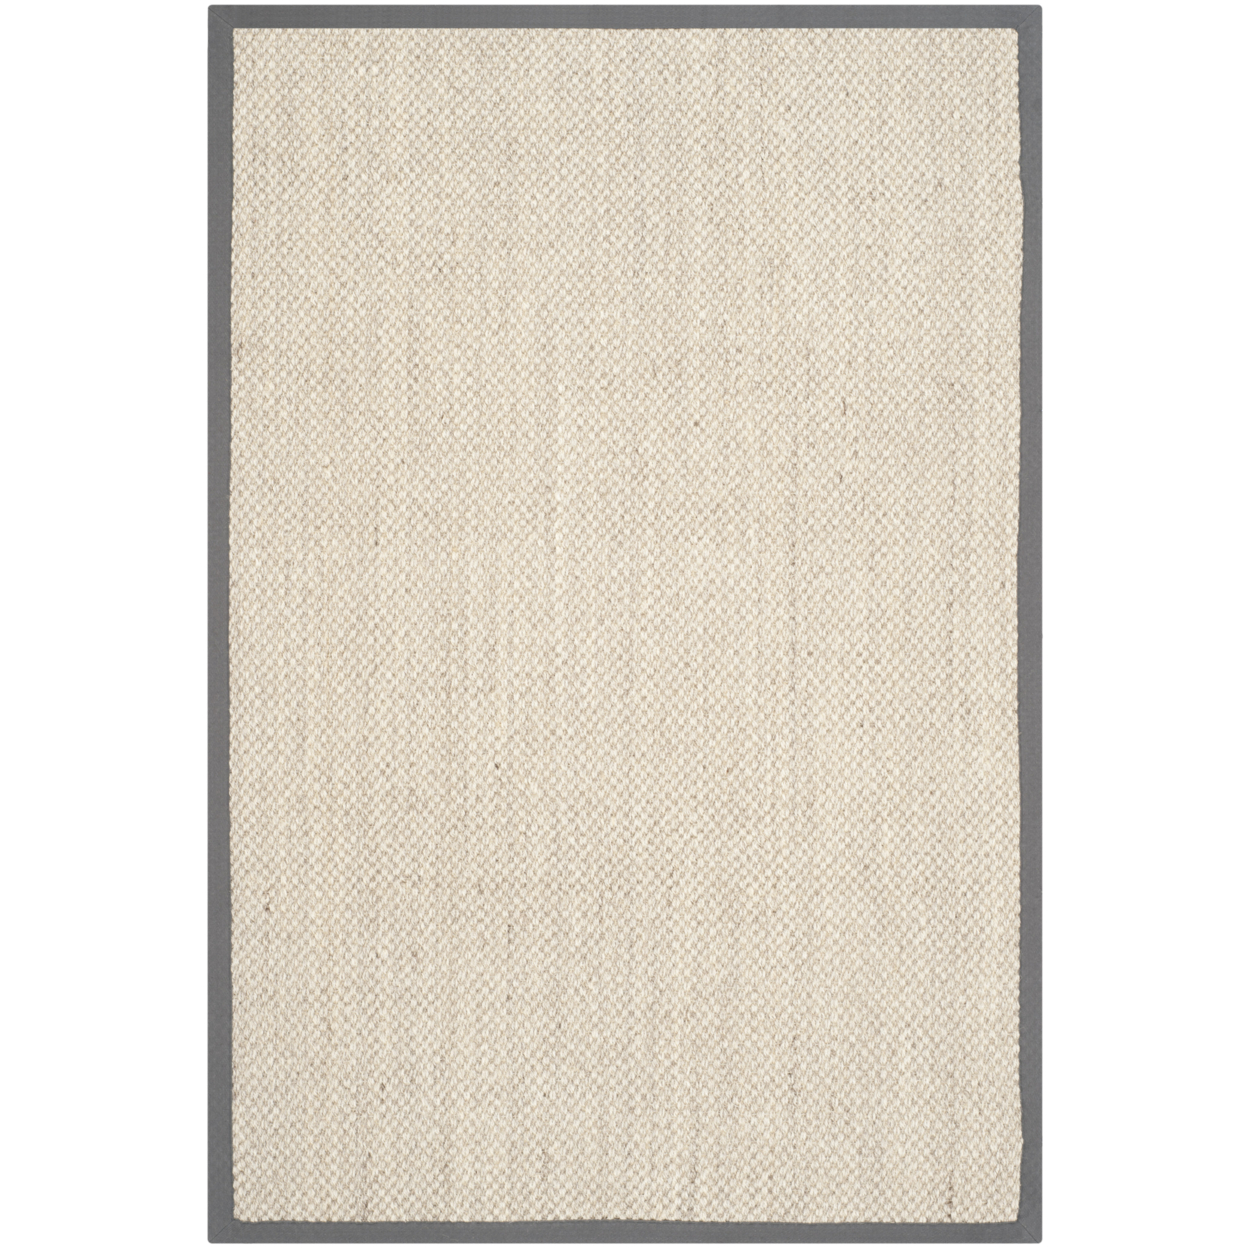 SAFAVIEH Natural Fiber Collection NF443B Marble/Grey Rug - 4' X 6'